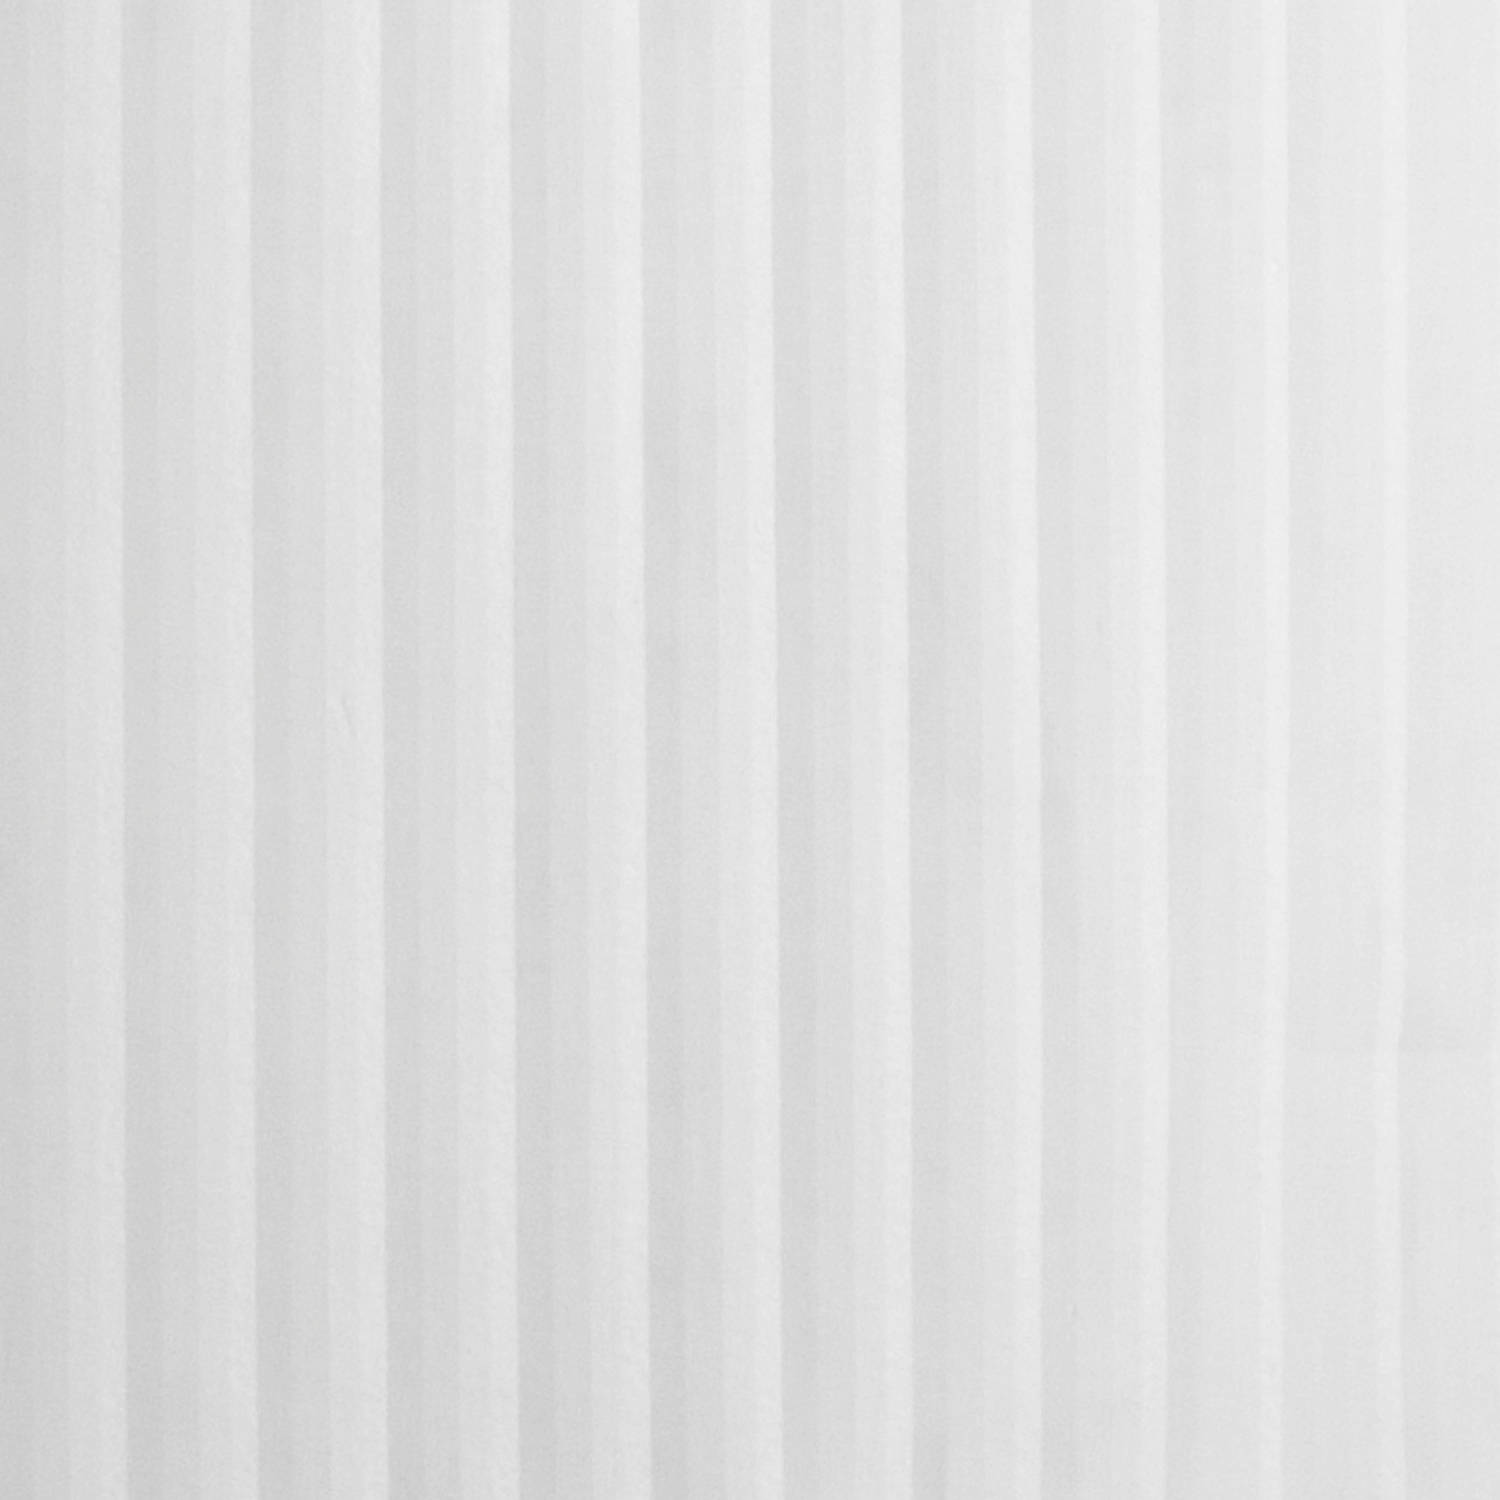 Better Homes and Gardens Elise Woven Stripe Sheer Window Panel - image 2 of 2